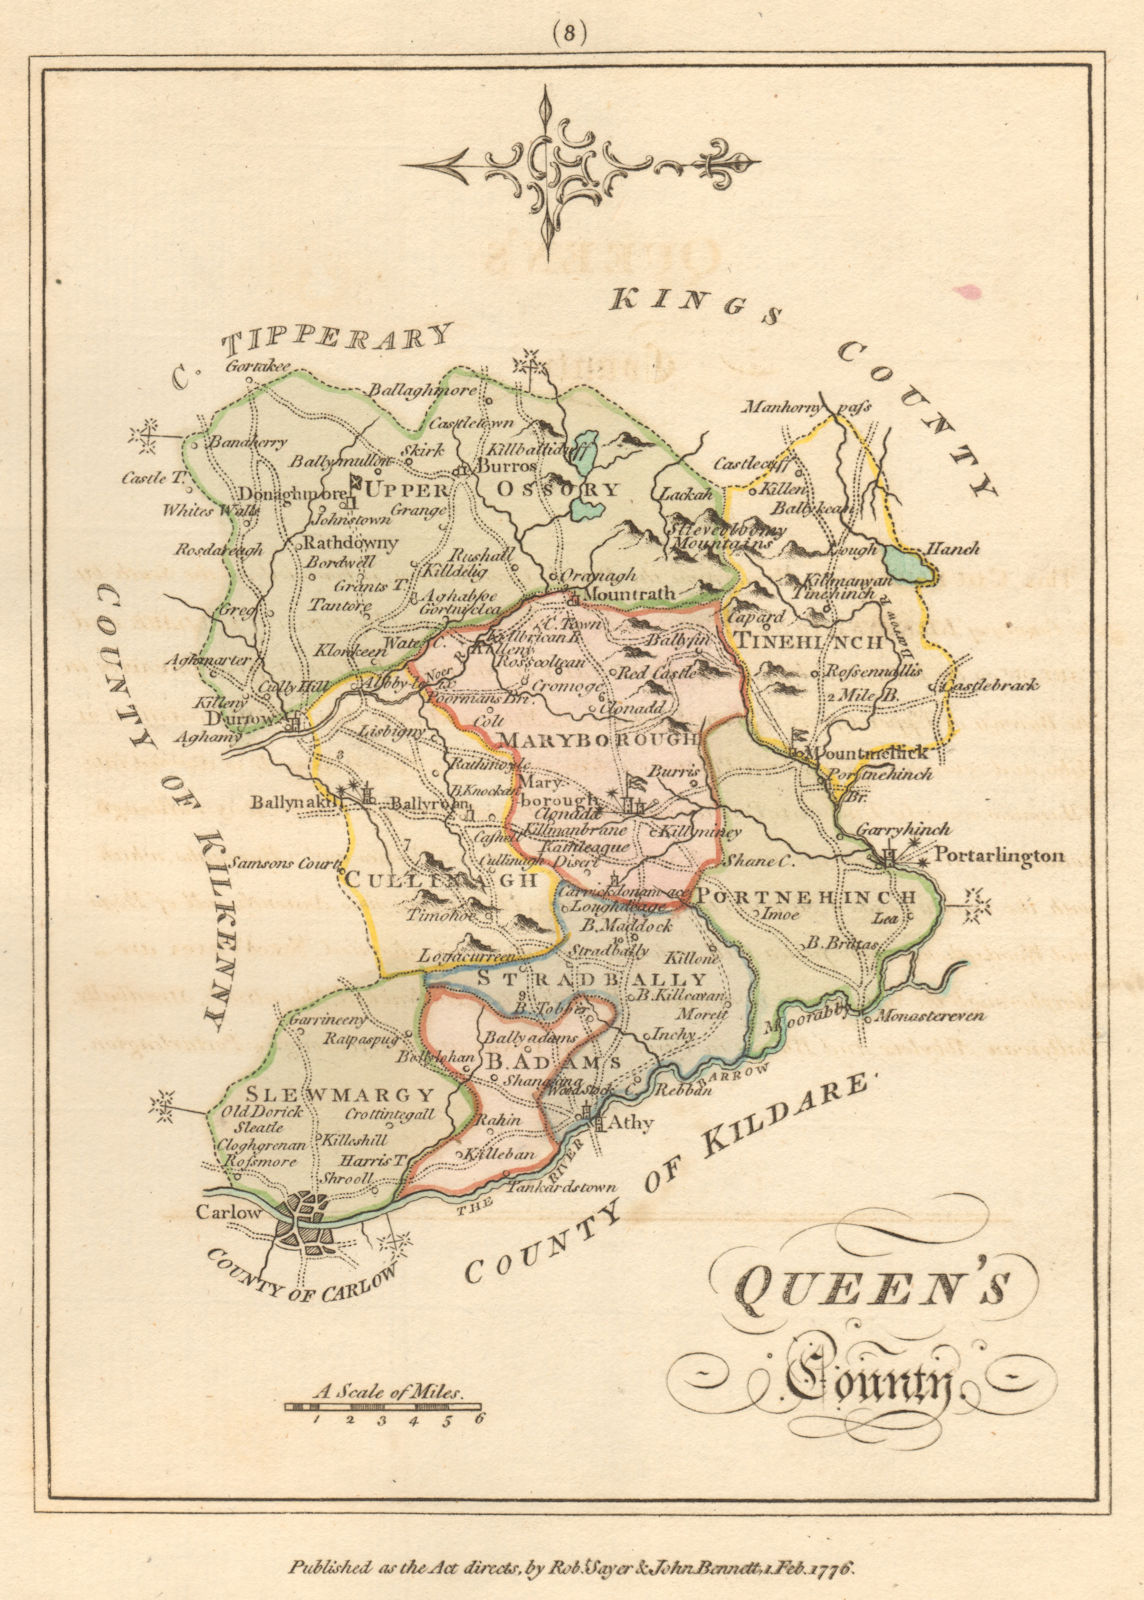 Queens County (Laois), Leinster. Antique copperplate map. Scalé / Sayer 1776